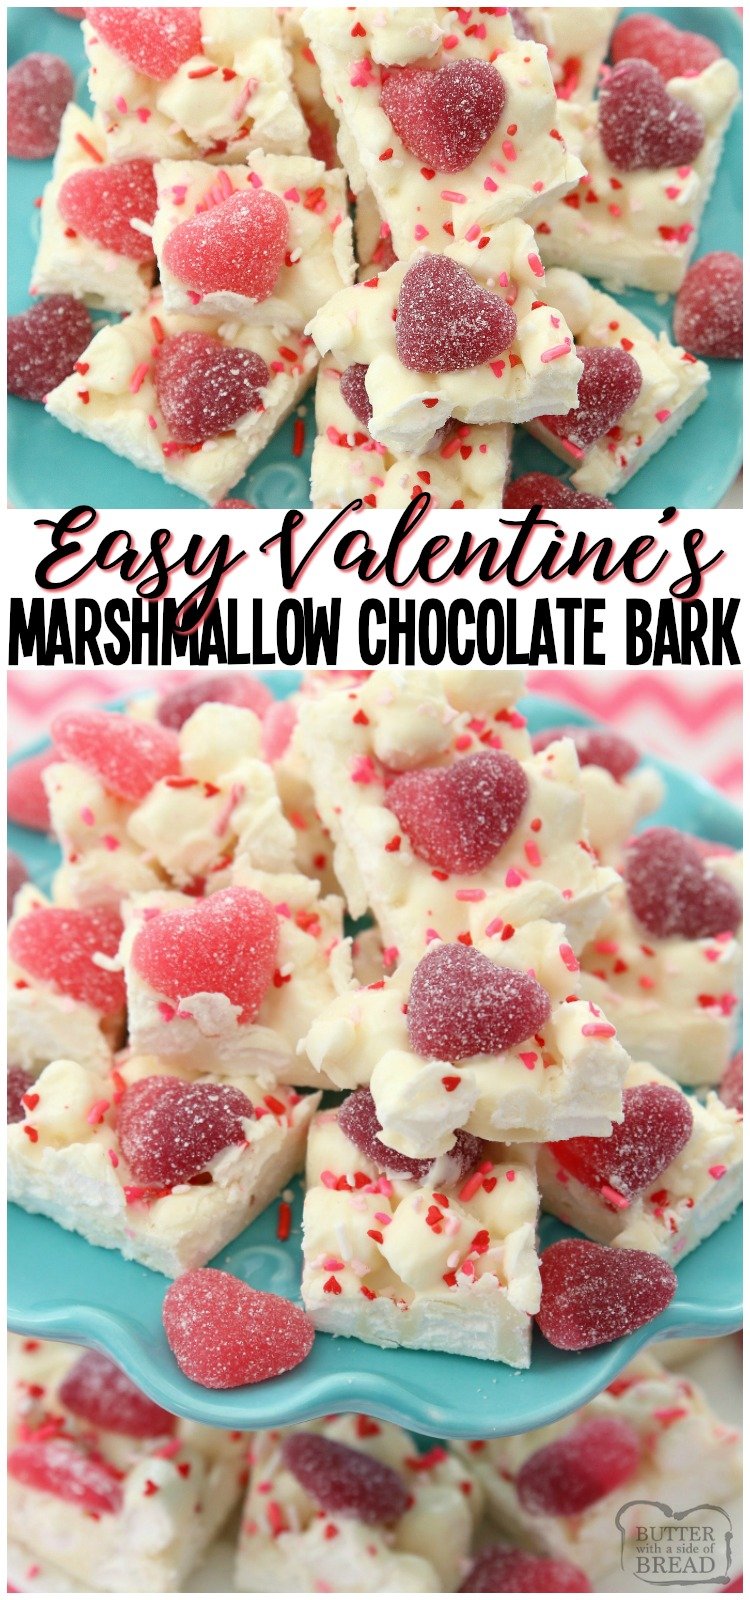 Valentine's Marshmallow Chocolate Bark is a simple, festive dessert that everyone loves! Made in minutes with just 3 ingredients, these chocolate squares are perfect for Valentine's Day! #candy #marshmallows #Valentines #recipe #chocolatebark from BUTTER WITH A SIDE OF BREAD #chocolate